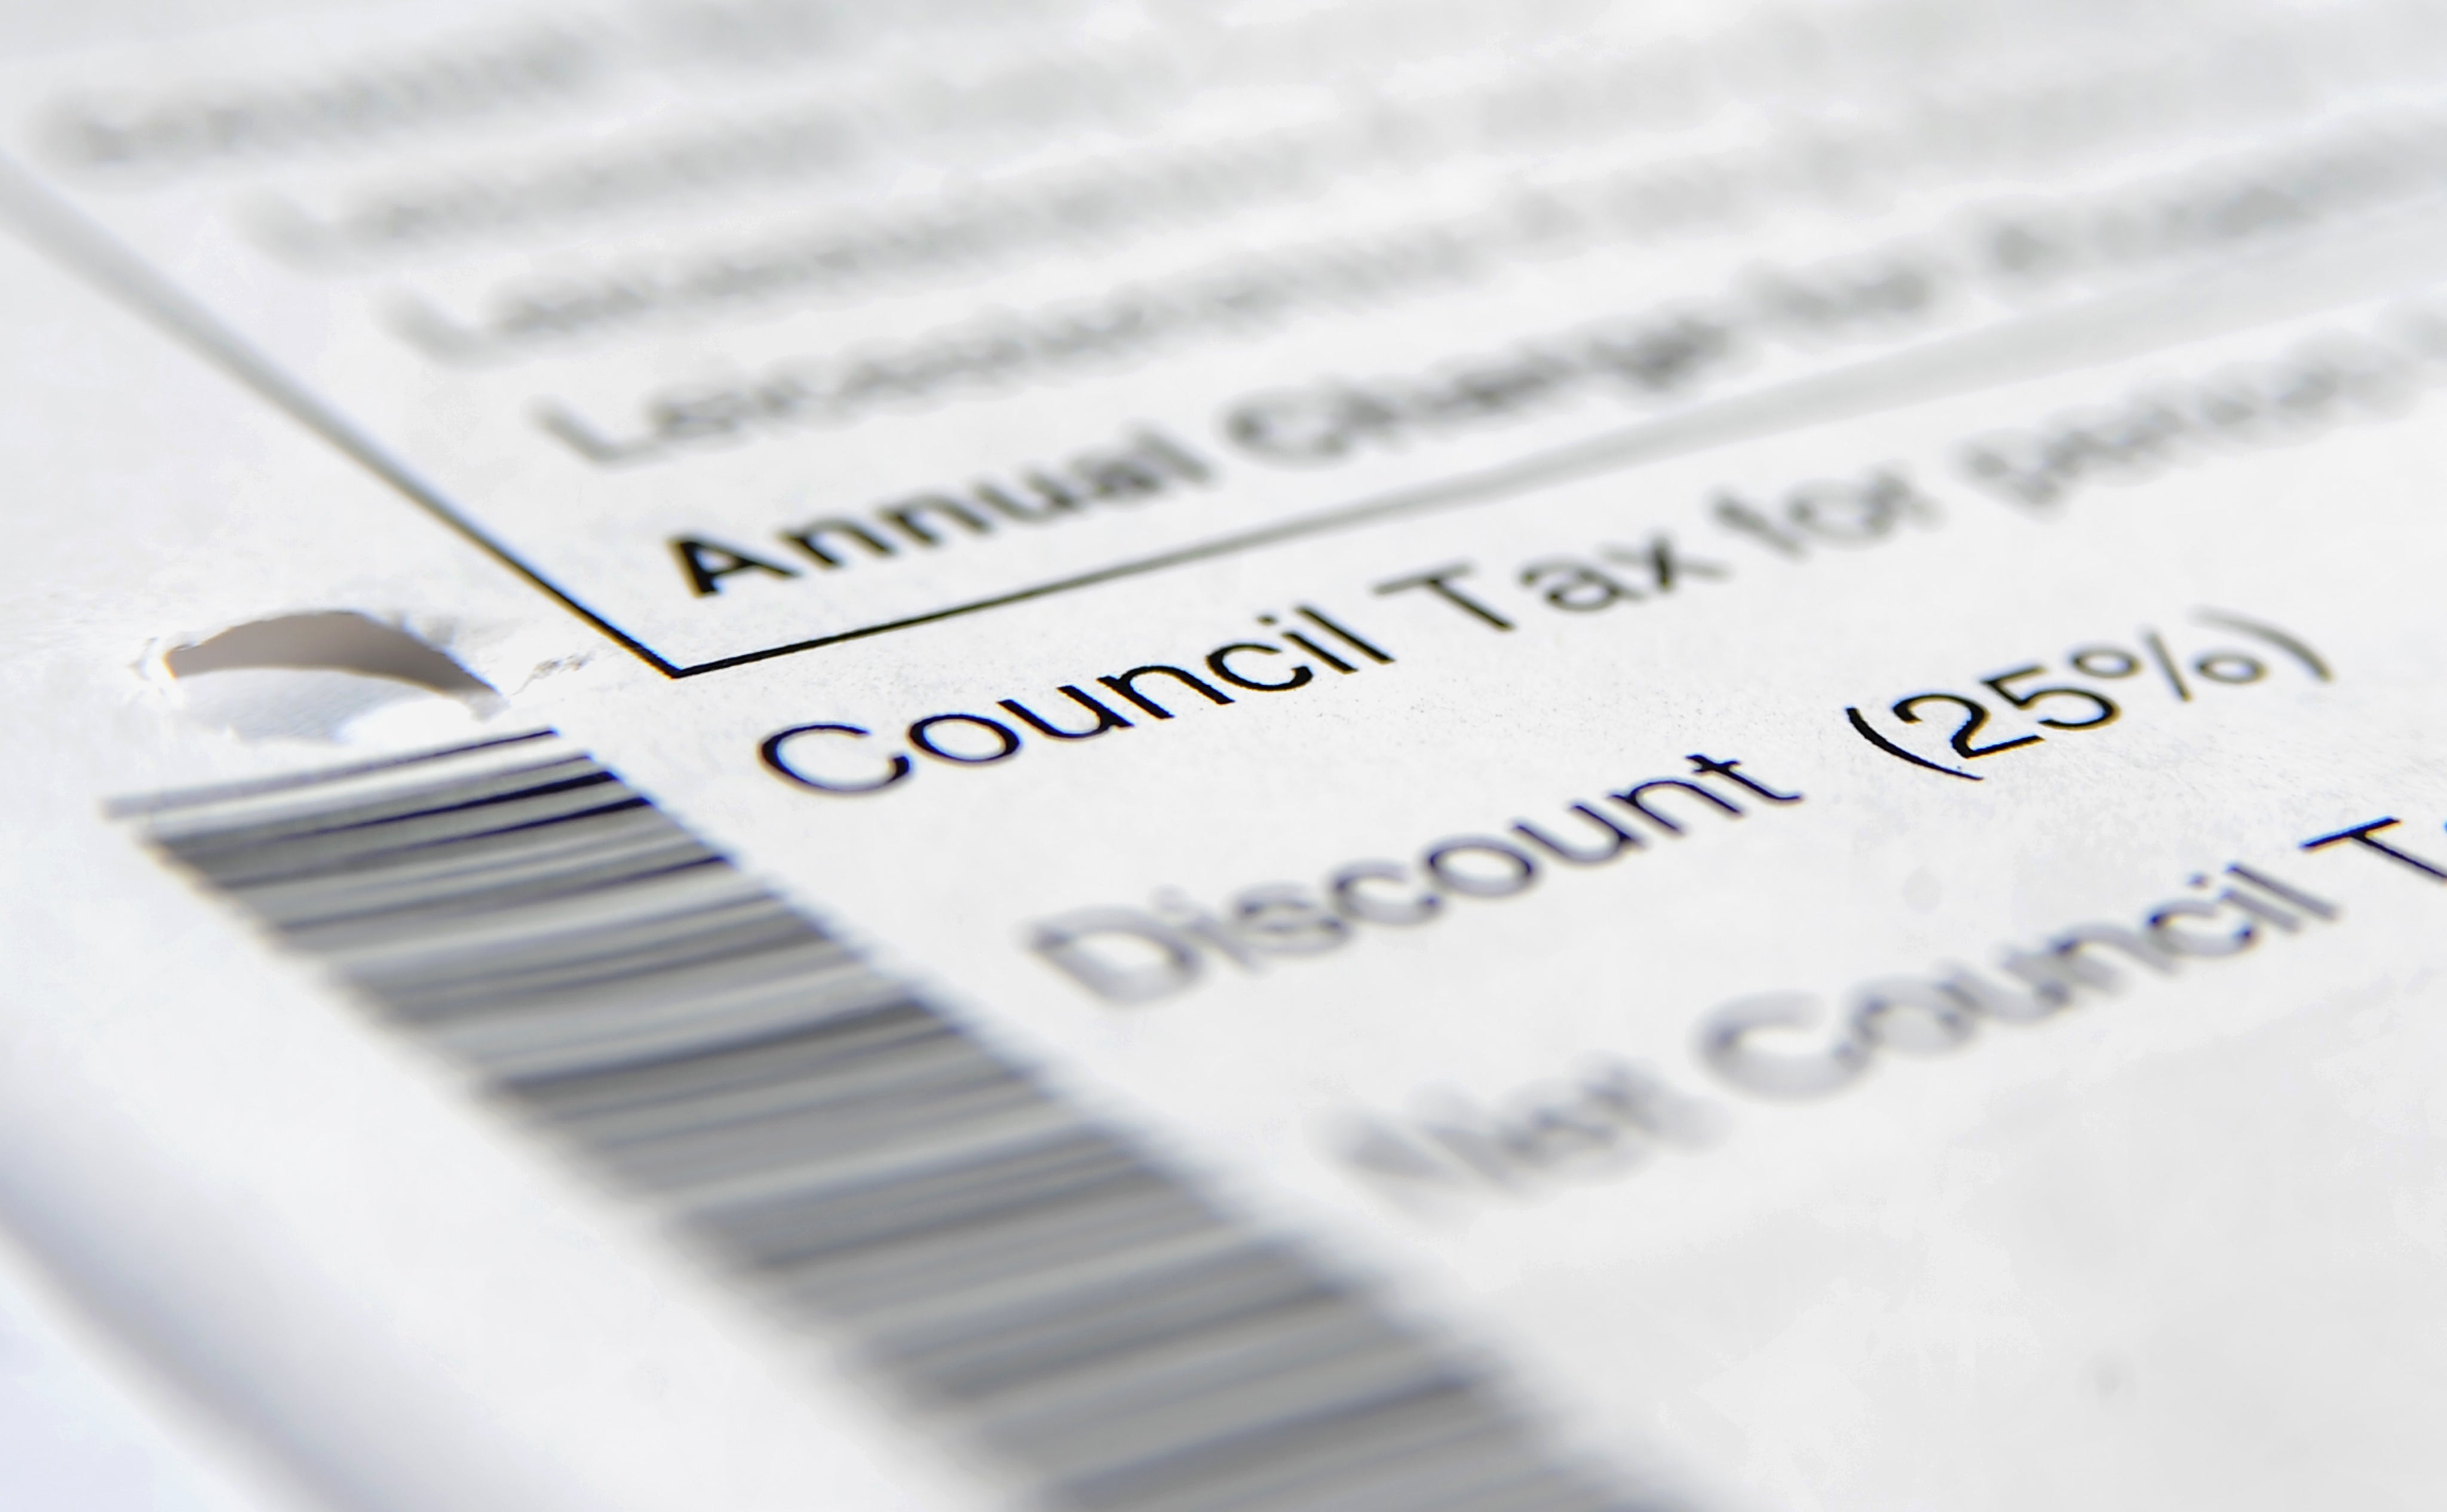 council-tax-rates-2022-23-in-your-area-see-how-much-you-will-pay-as